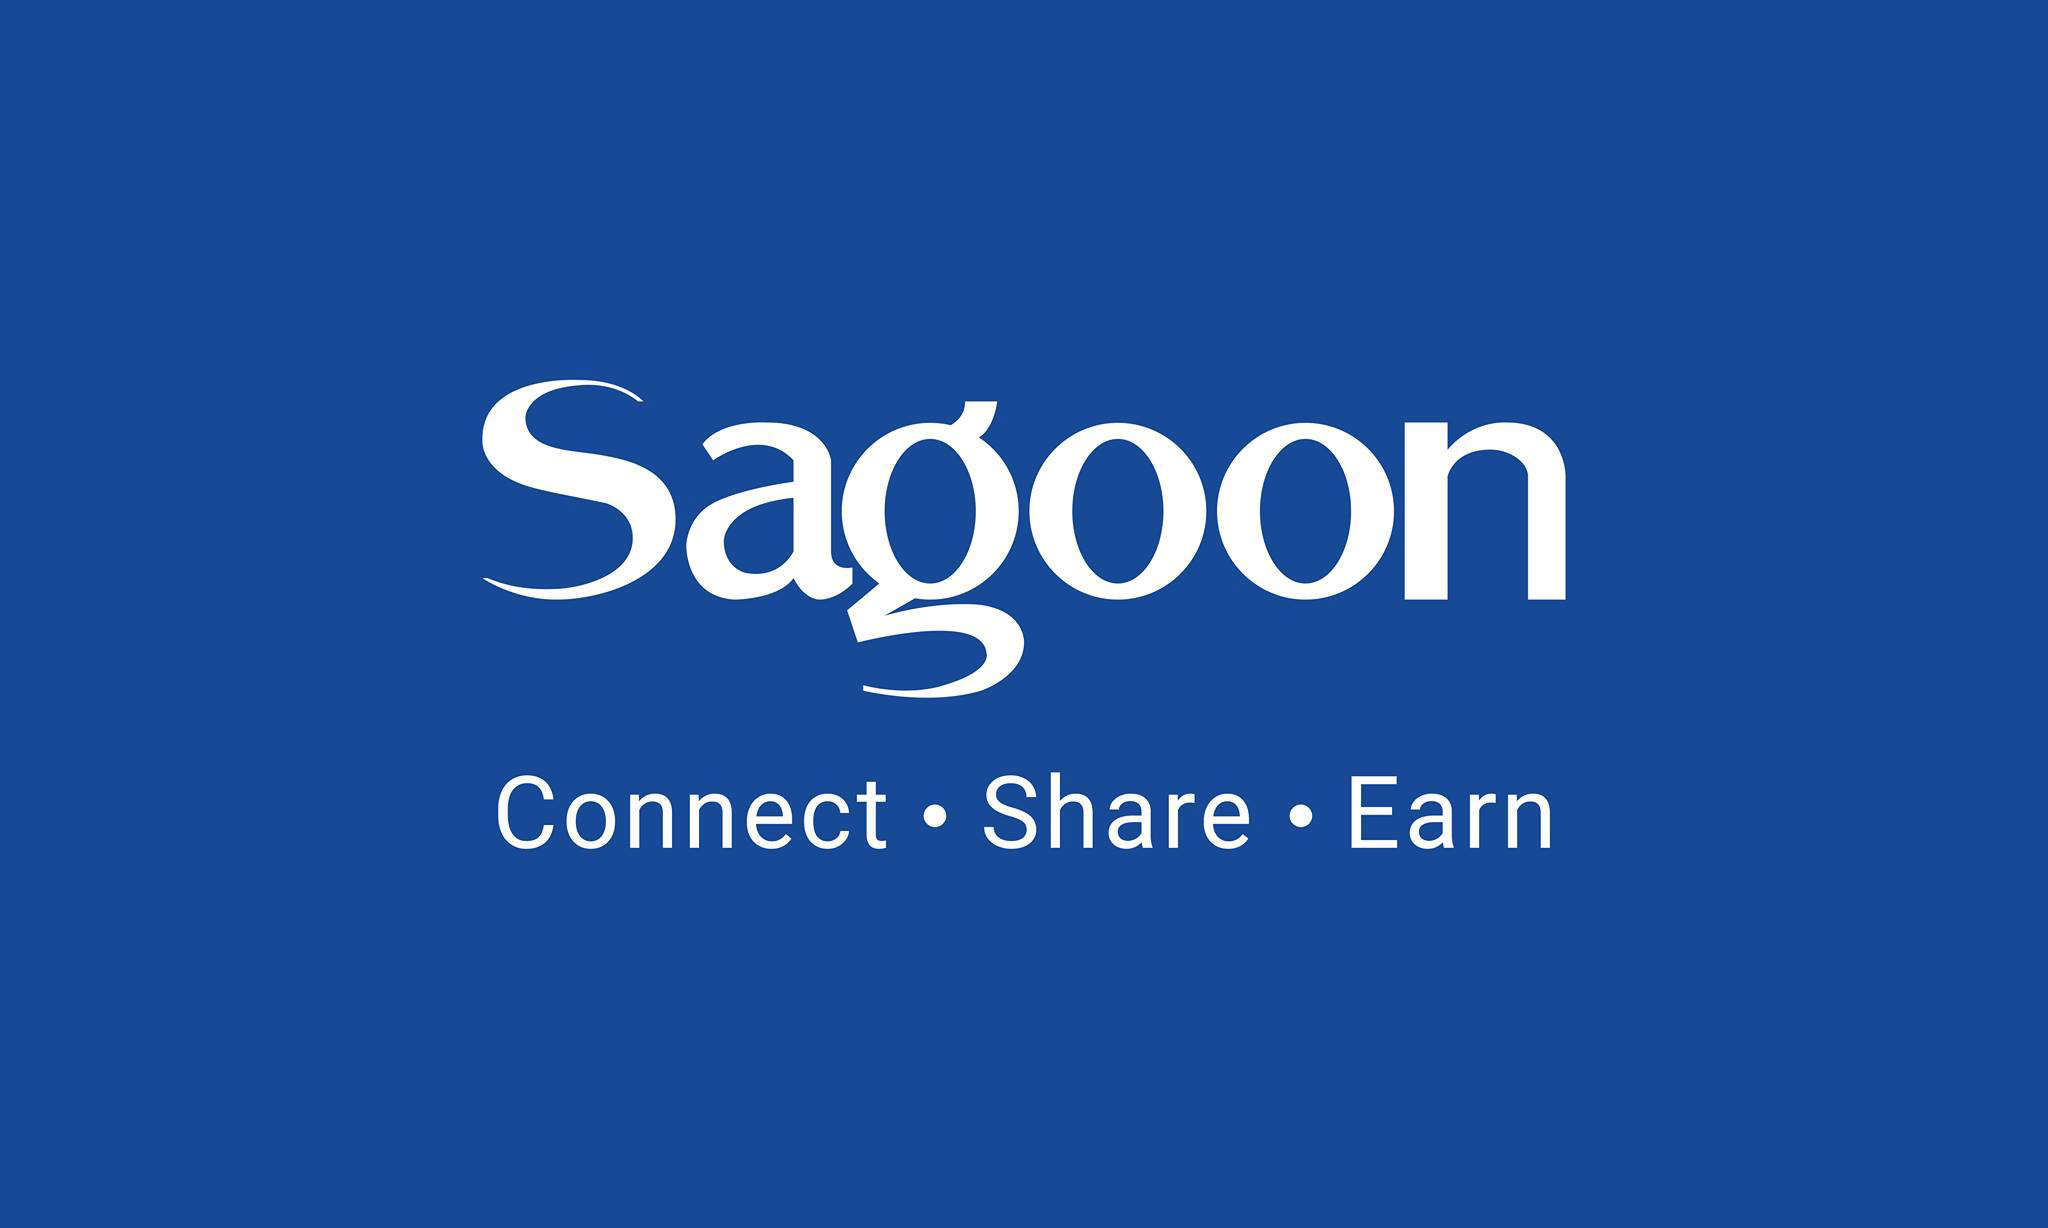 Sagoon launches IPO, calls on Nepalis abroad to invest